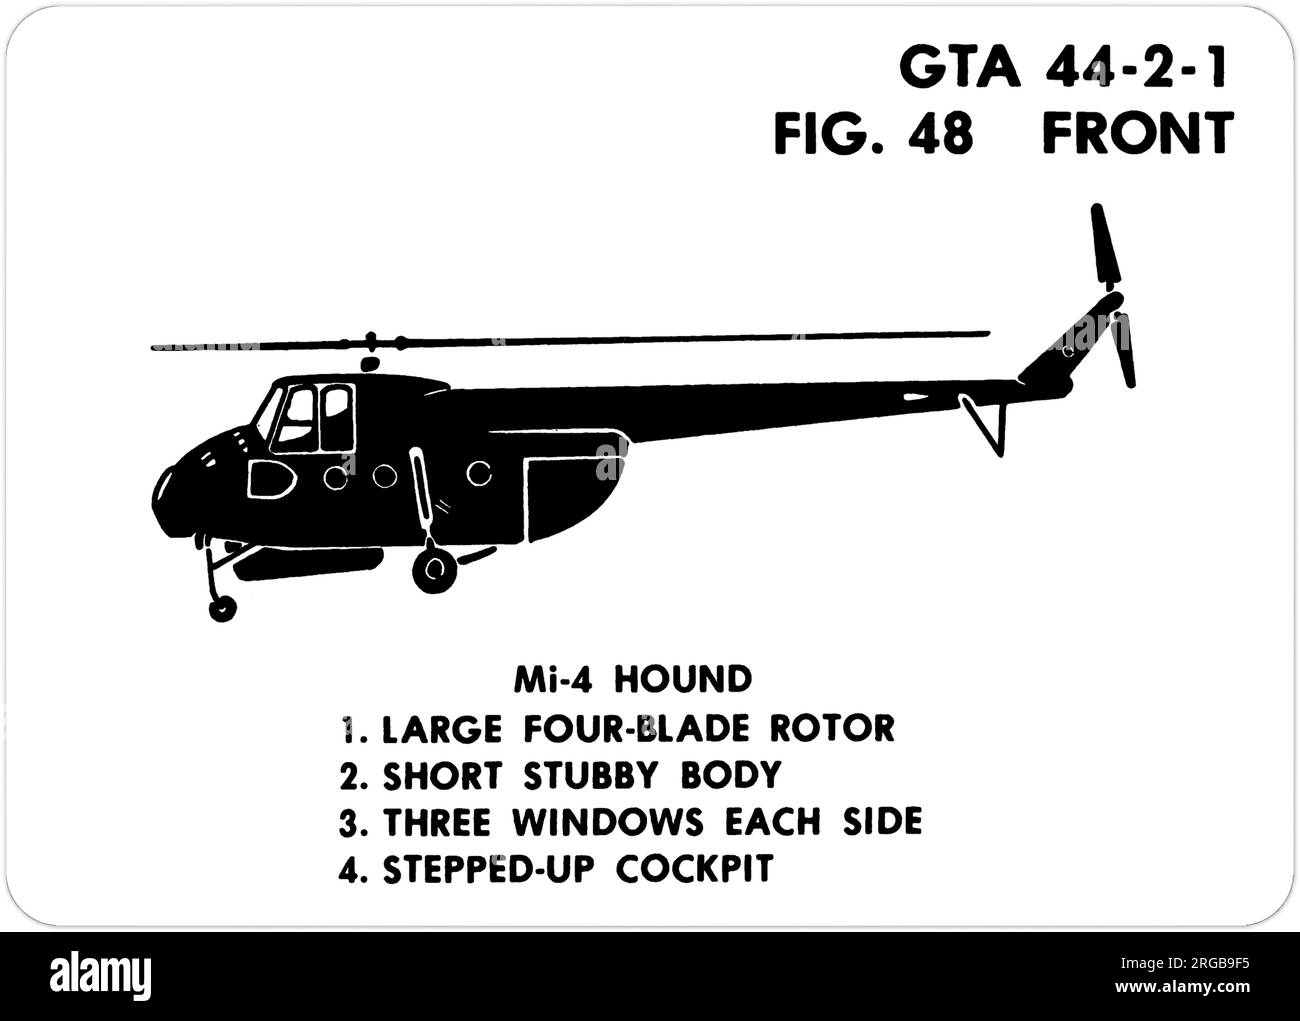 Mil Mi-4 (NATO codename: Hound). This is one of the series of Graphics Training Aids (GTA) used by the United States Army to train their personnel to recognize friendly and hostile aircraft. This particular set, GTA 44-2-1, was issued in July1977. The set features aircraft from: Canada, Italy, United Kingdom, United States, and the USSR. Stock Photo